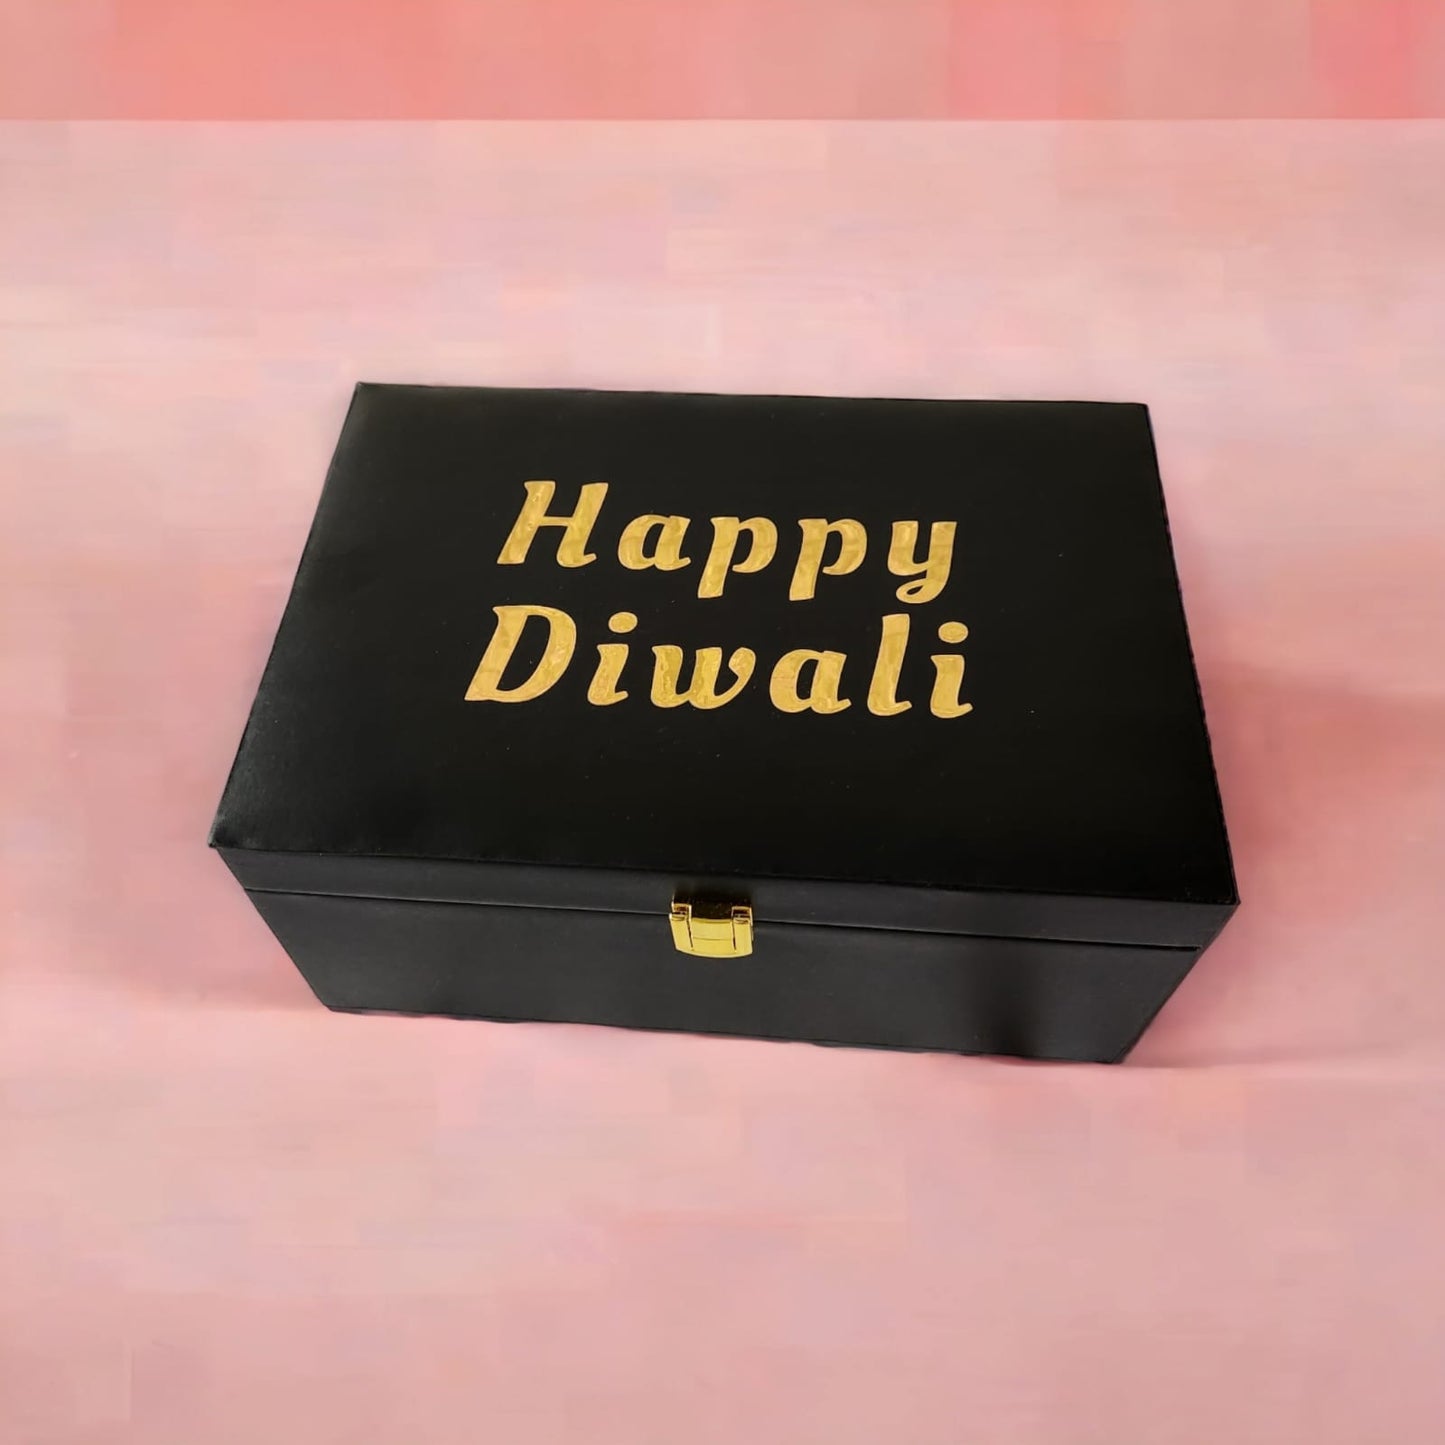 Diwali Gift Box with Personalized Black Passport Cover Custom Coffee Tumbler, Pen & Chocolates-10GM Silver Coin (Optional)